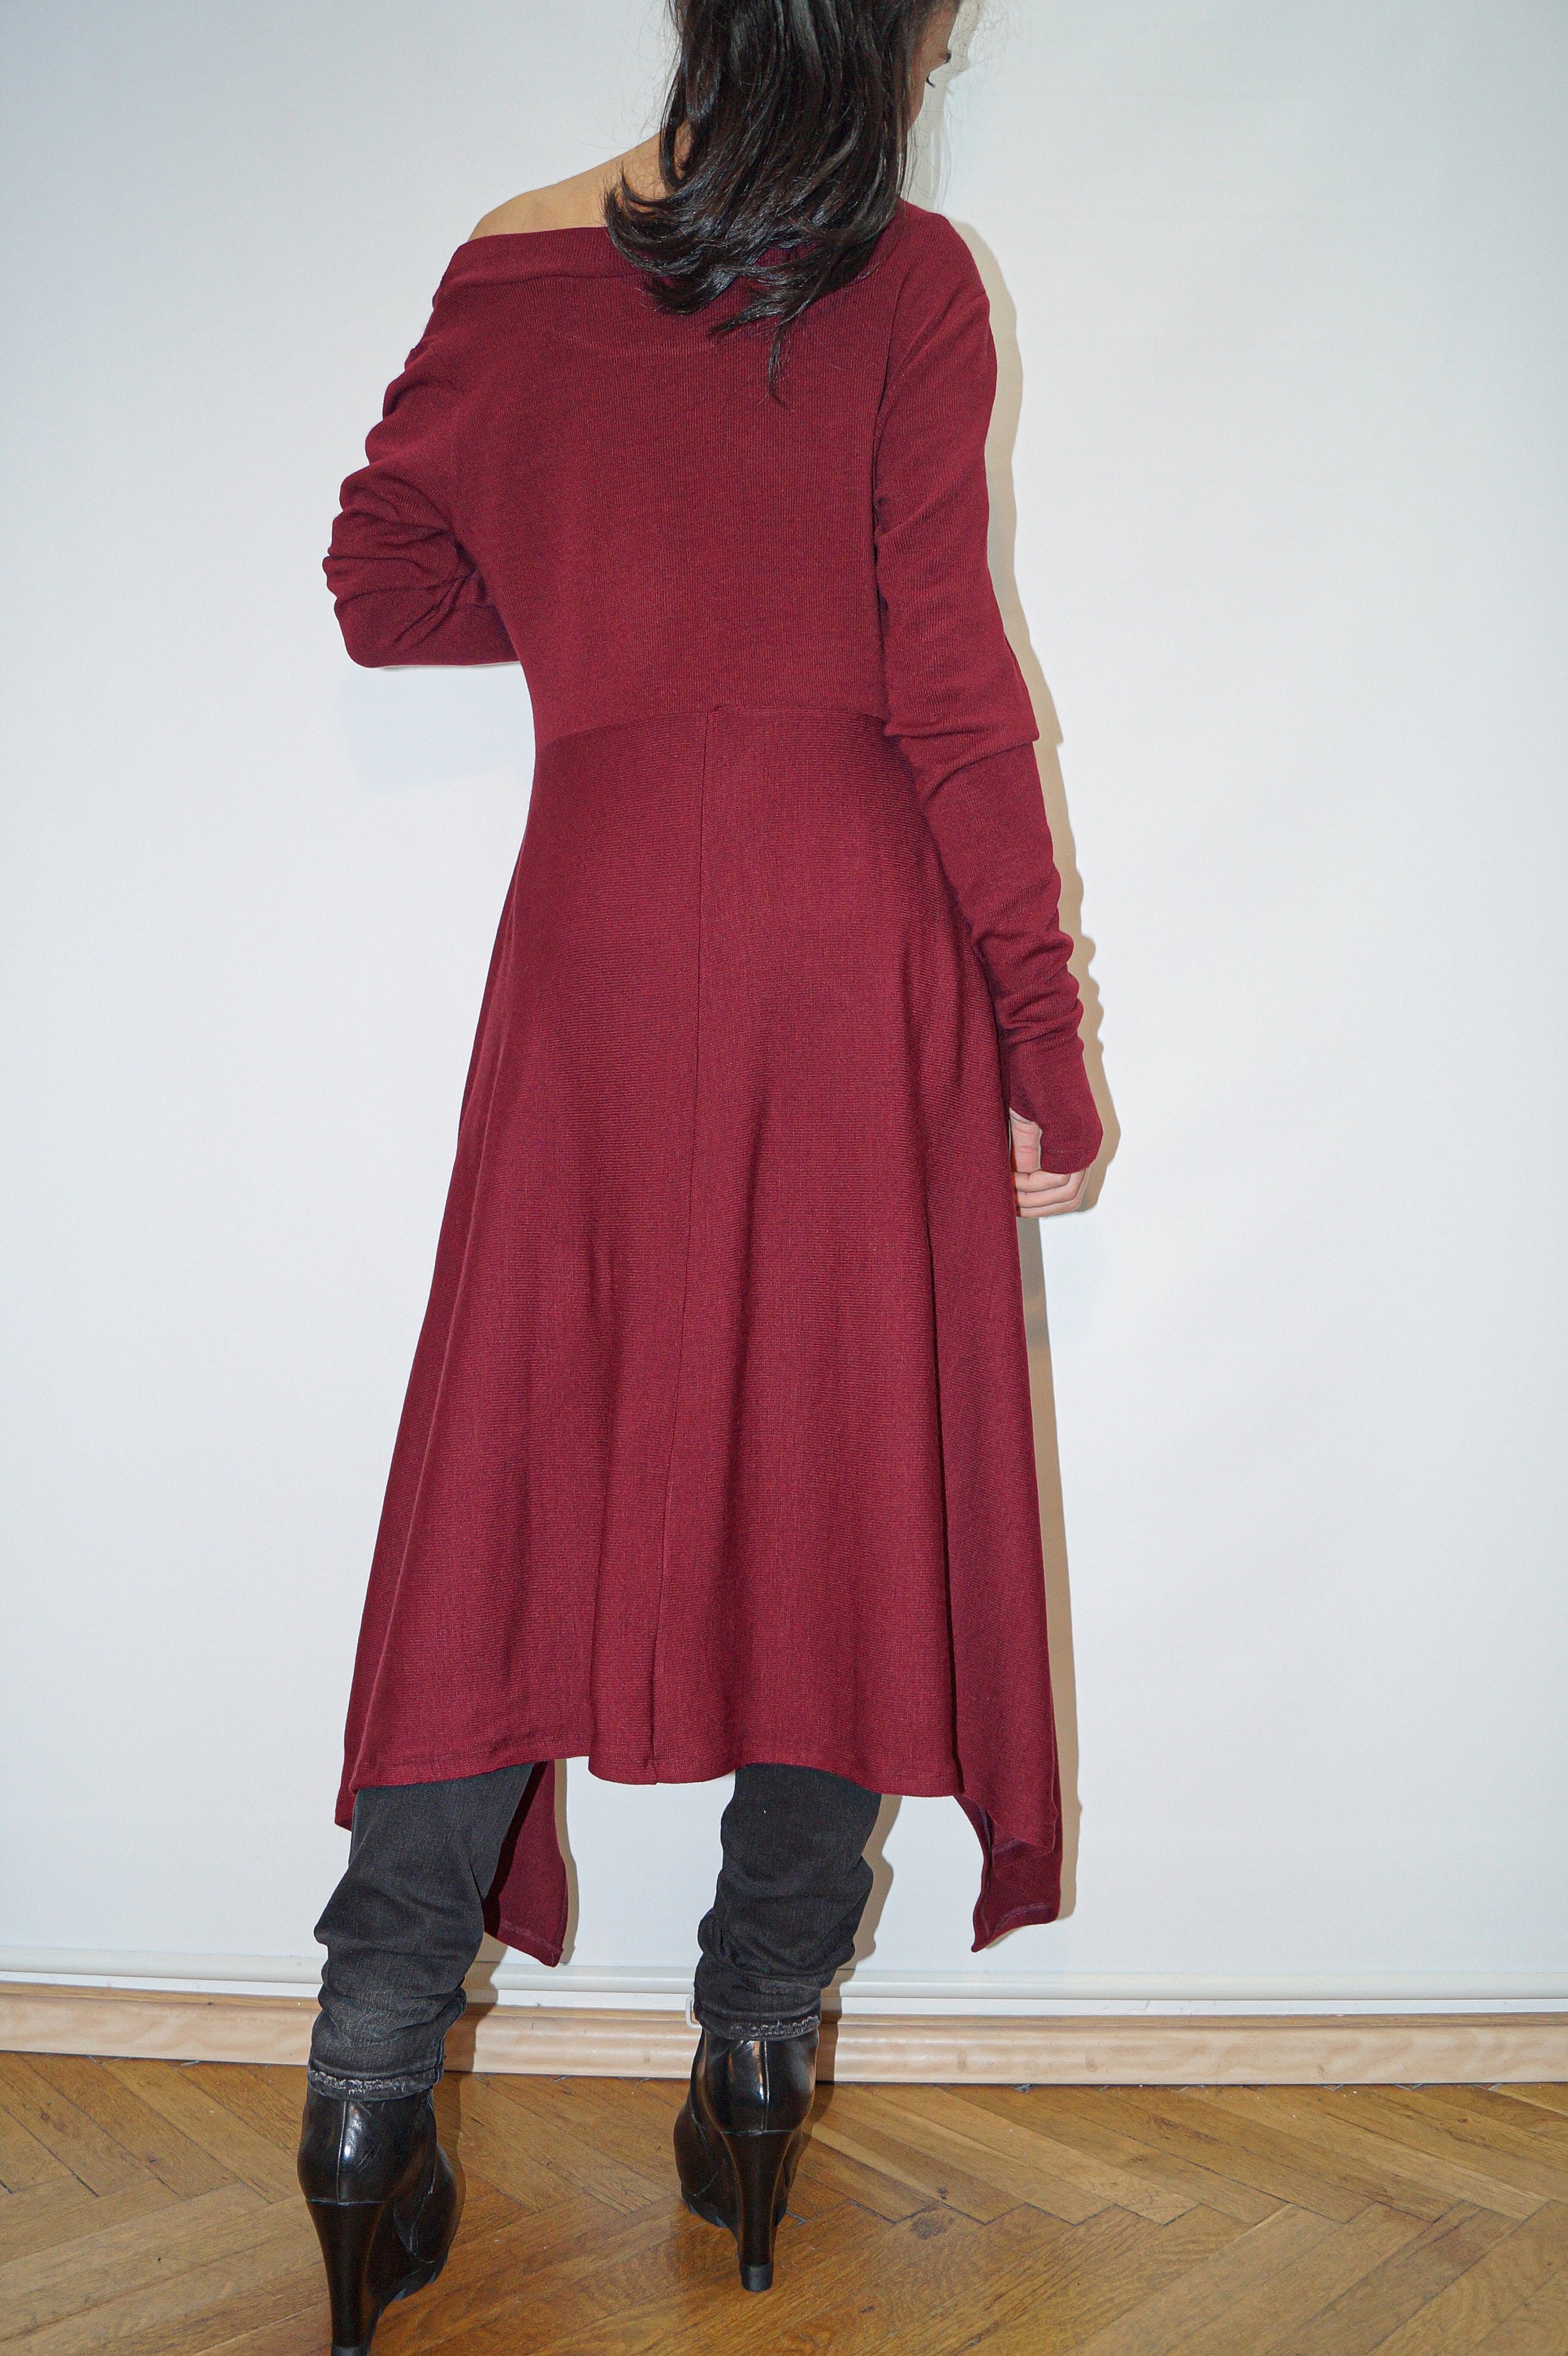 Red Asymmetrical Sweater/cozy Pullover/ Sweater Dress/knit - Etsy UK